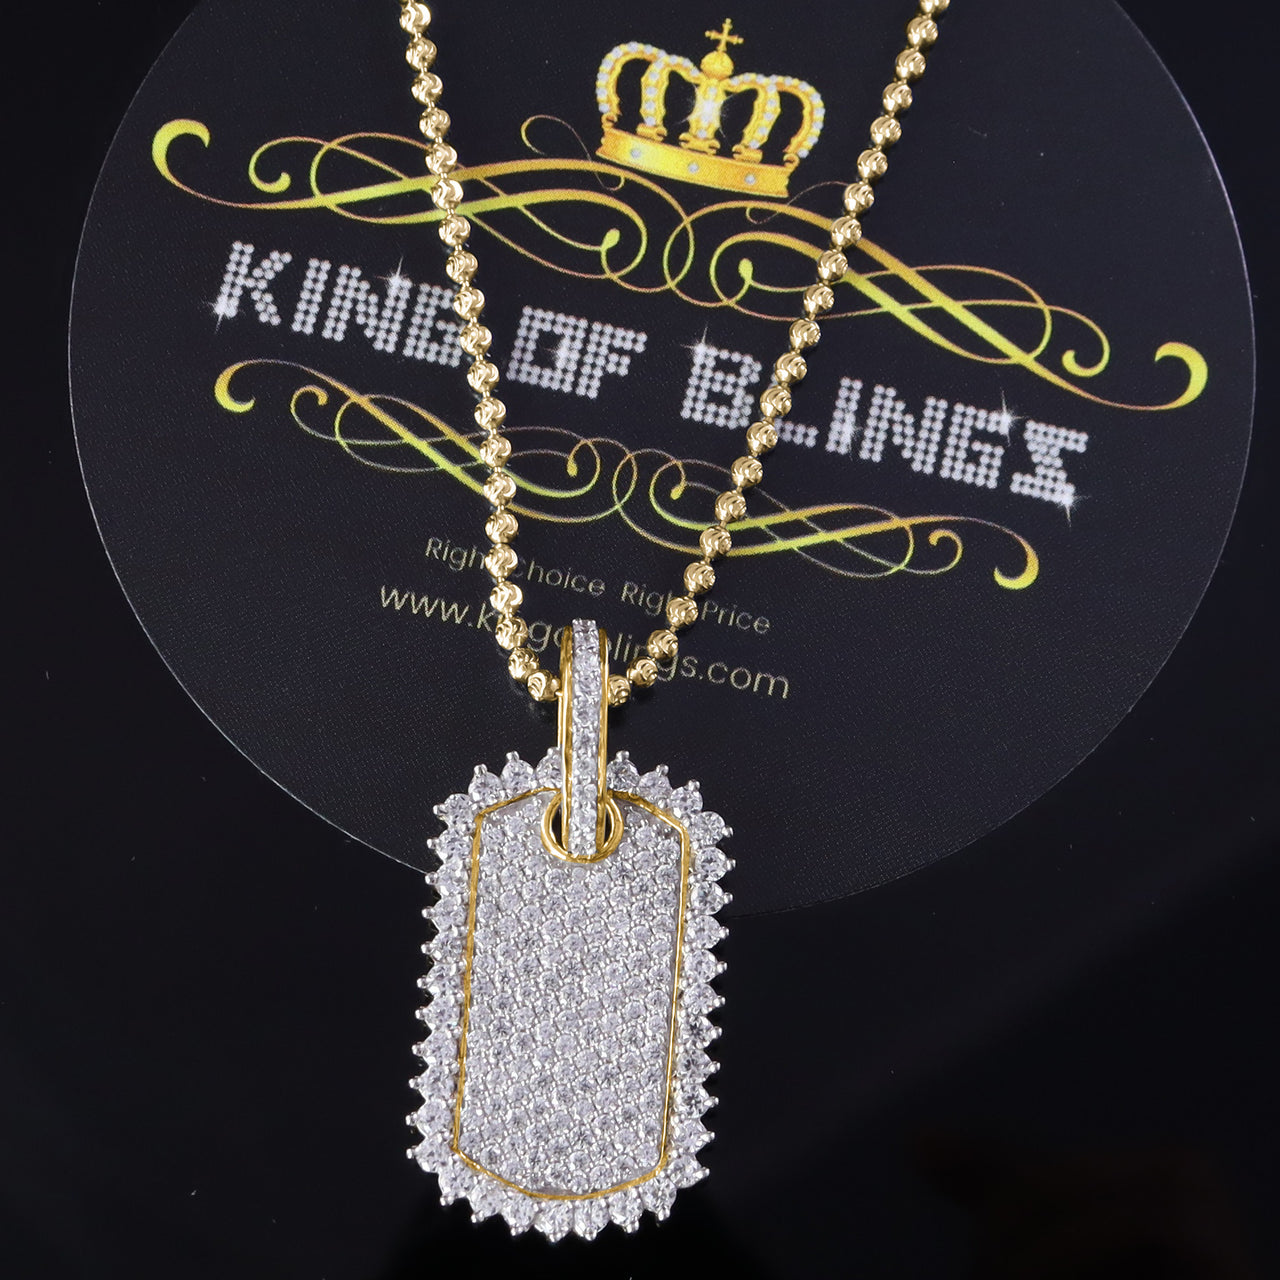 King of Bling's Yellow 925 Sterling Silver Dog Tag Pendant 3.93ct Cubic Zirconia KING OF BLINGS